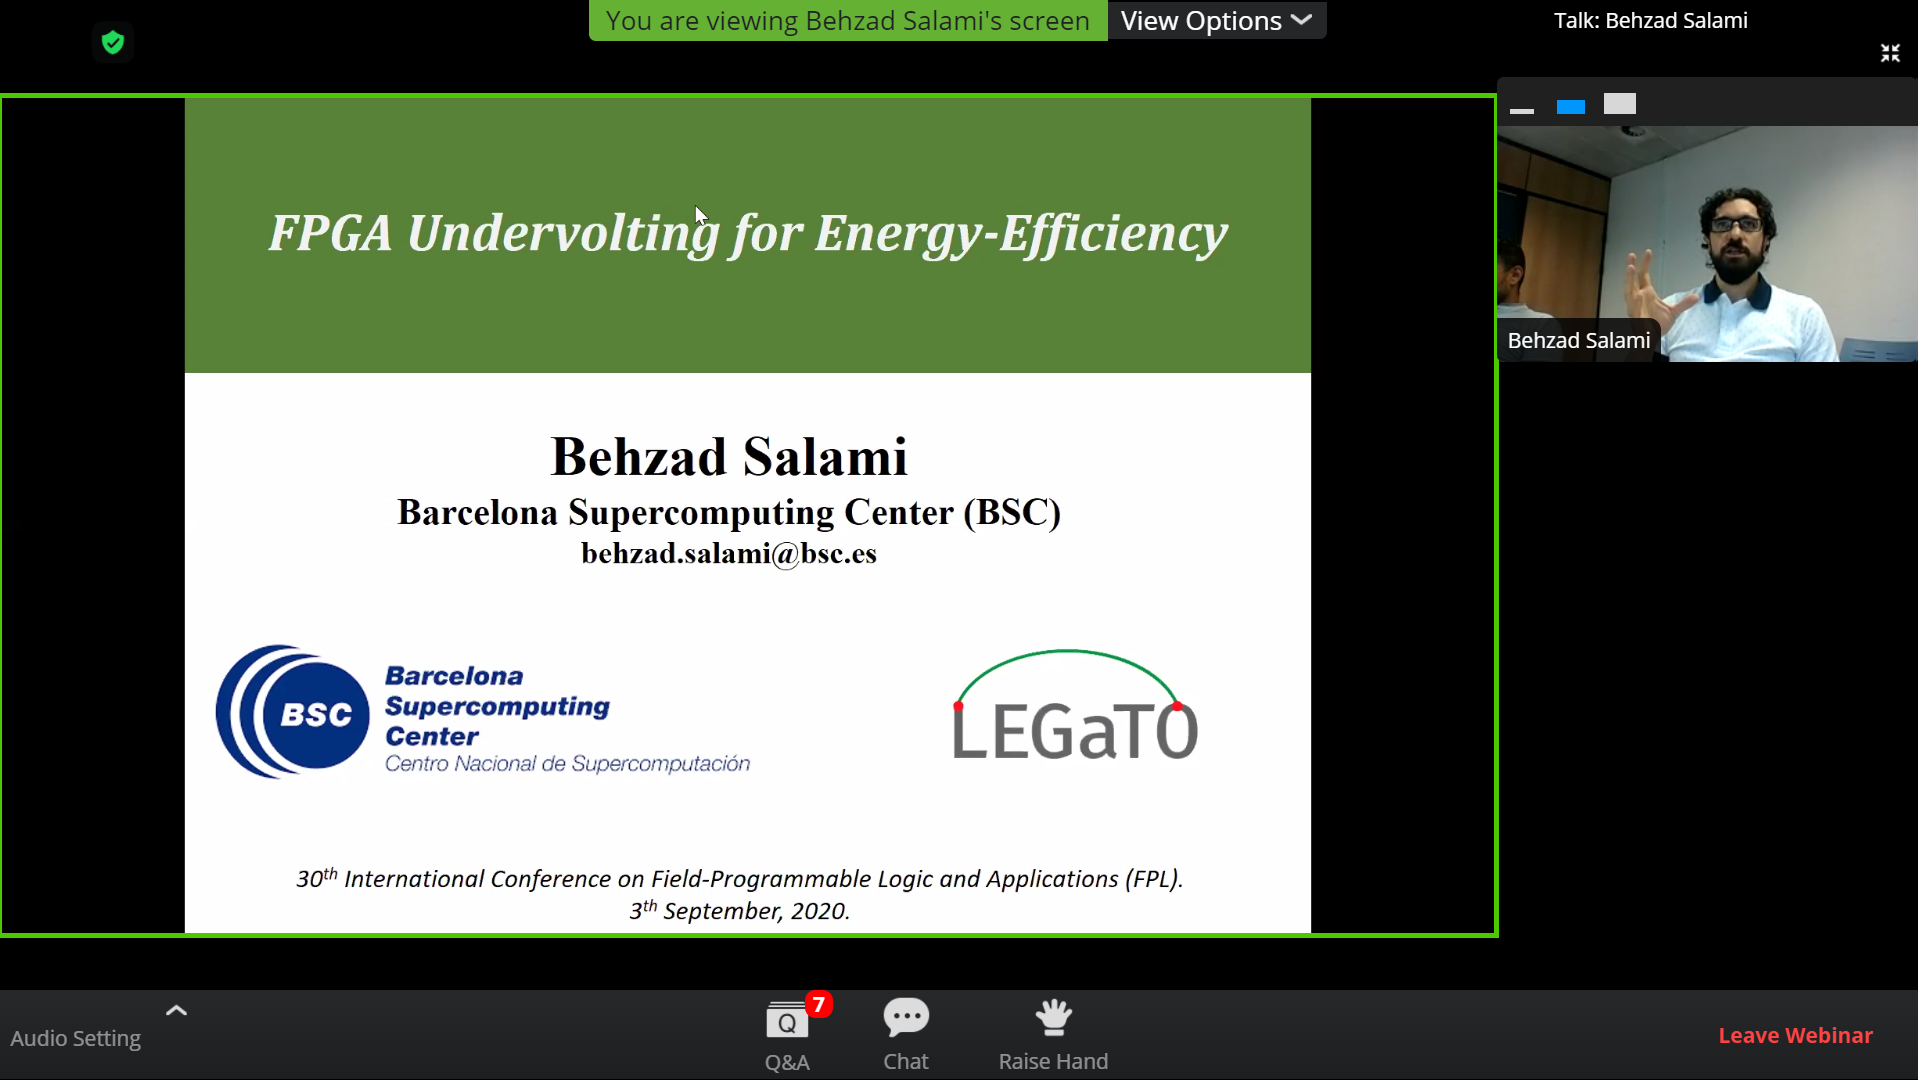 Behzad Salami presents during the tutorial